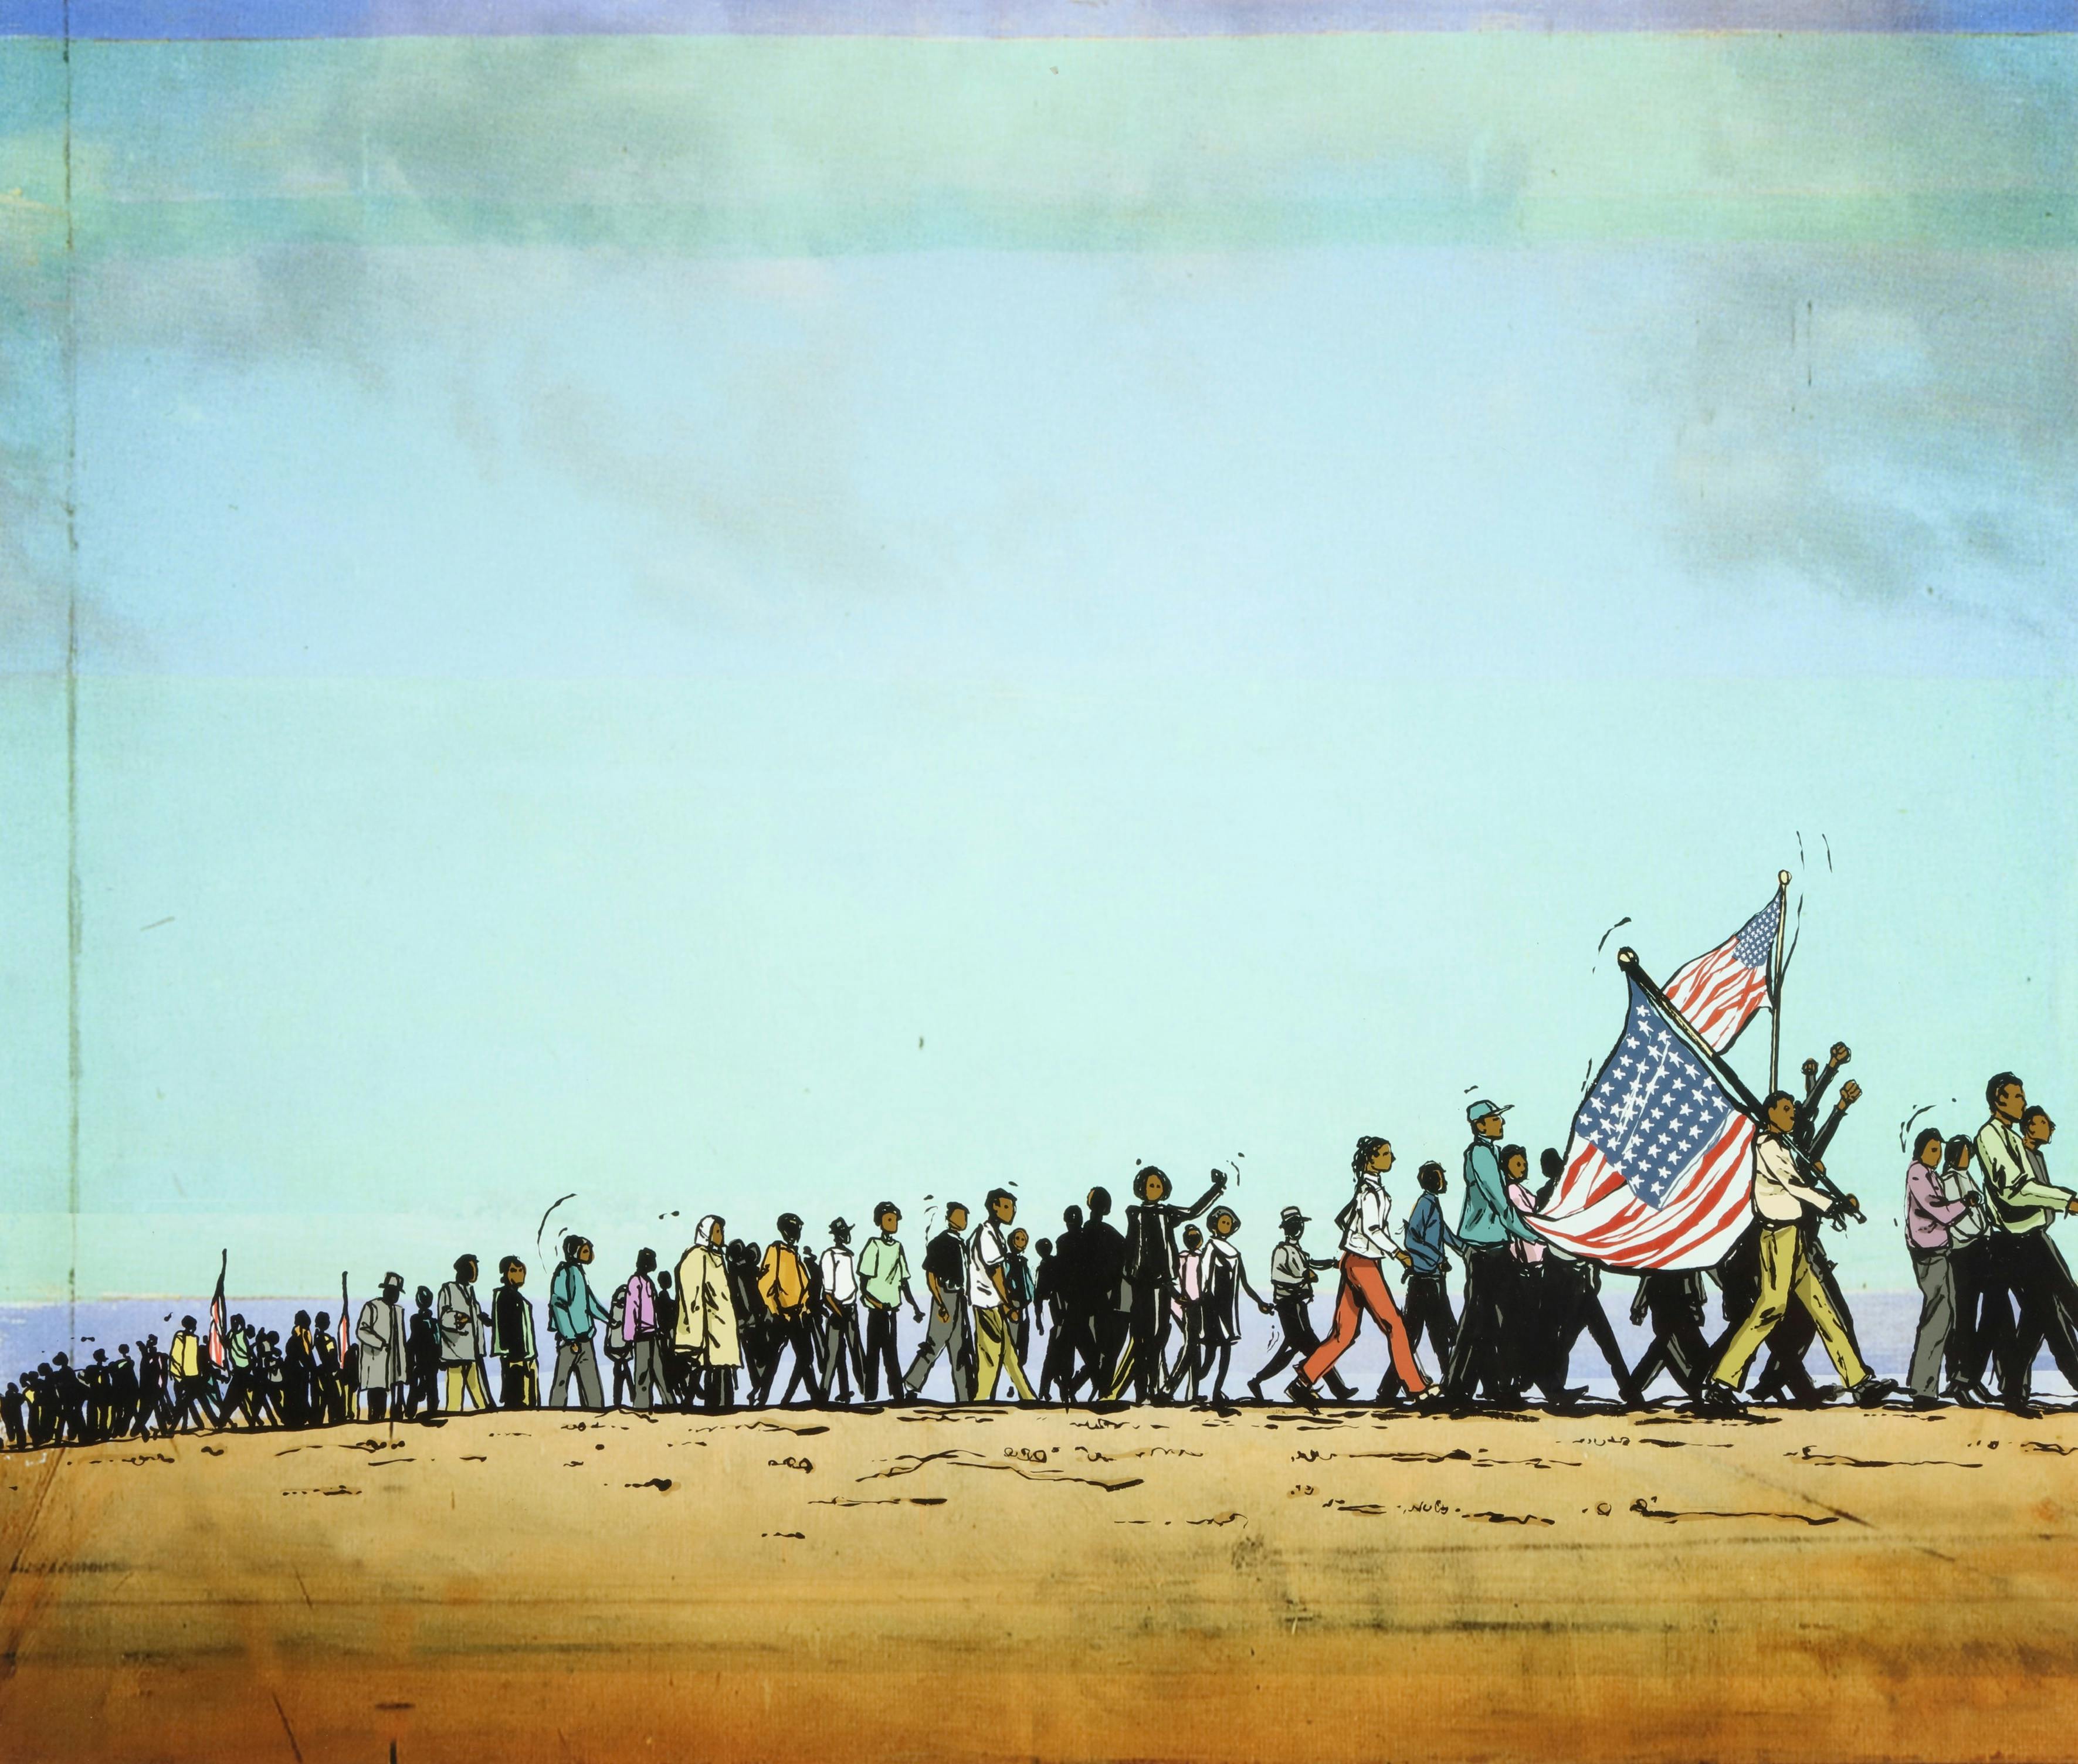 A PJ Loughran illustration from Turning 15 on the Road to Freedom: My Story of the 1965 Selma Voting Rights March by Lynda Blackmon Lowery, showing a long line of marchers against a blue sky